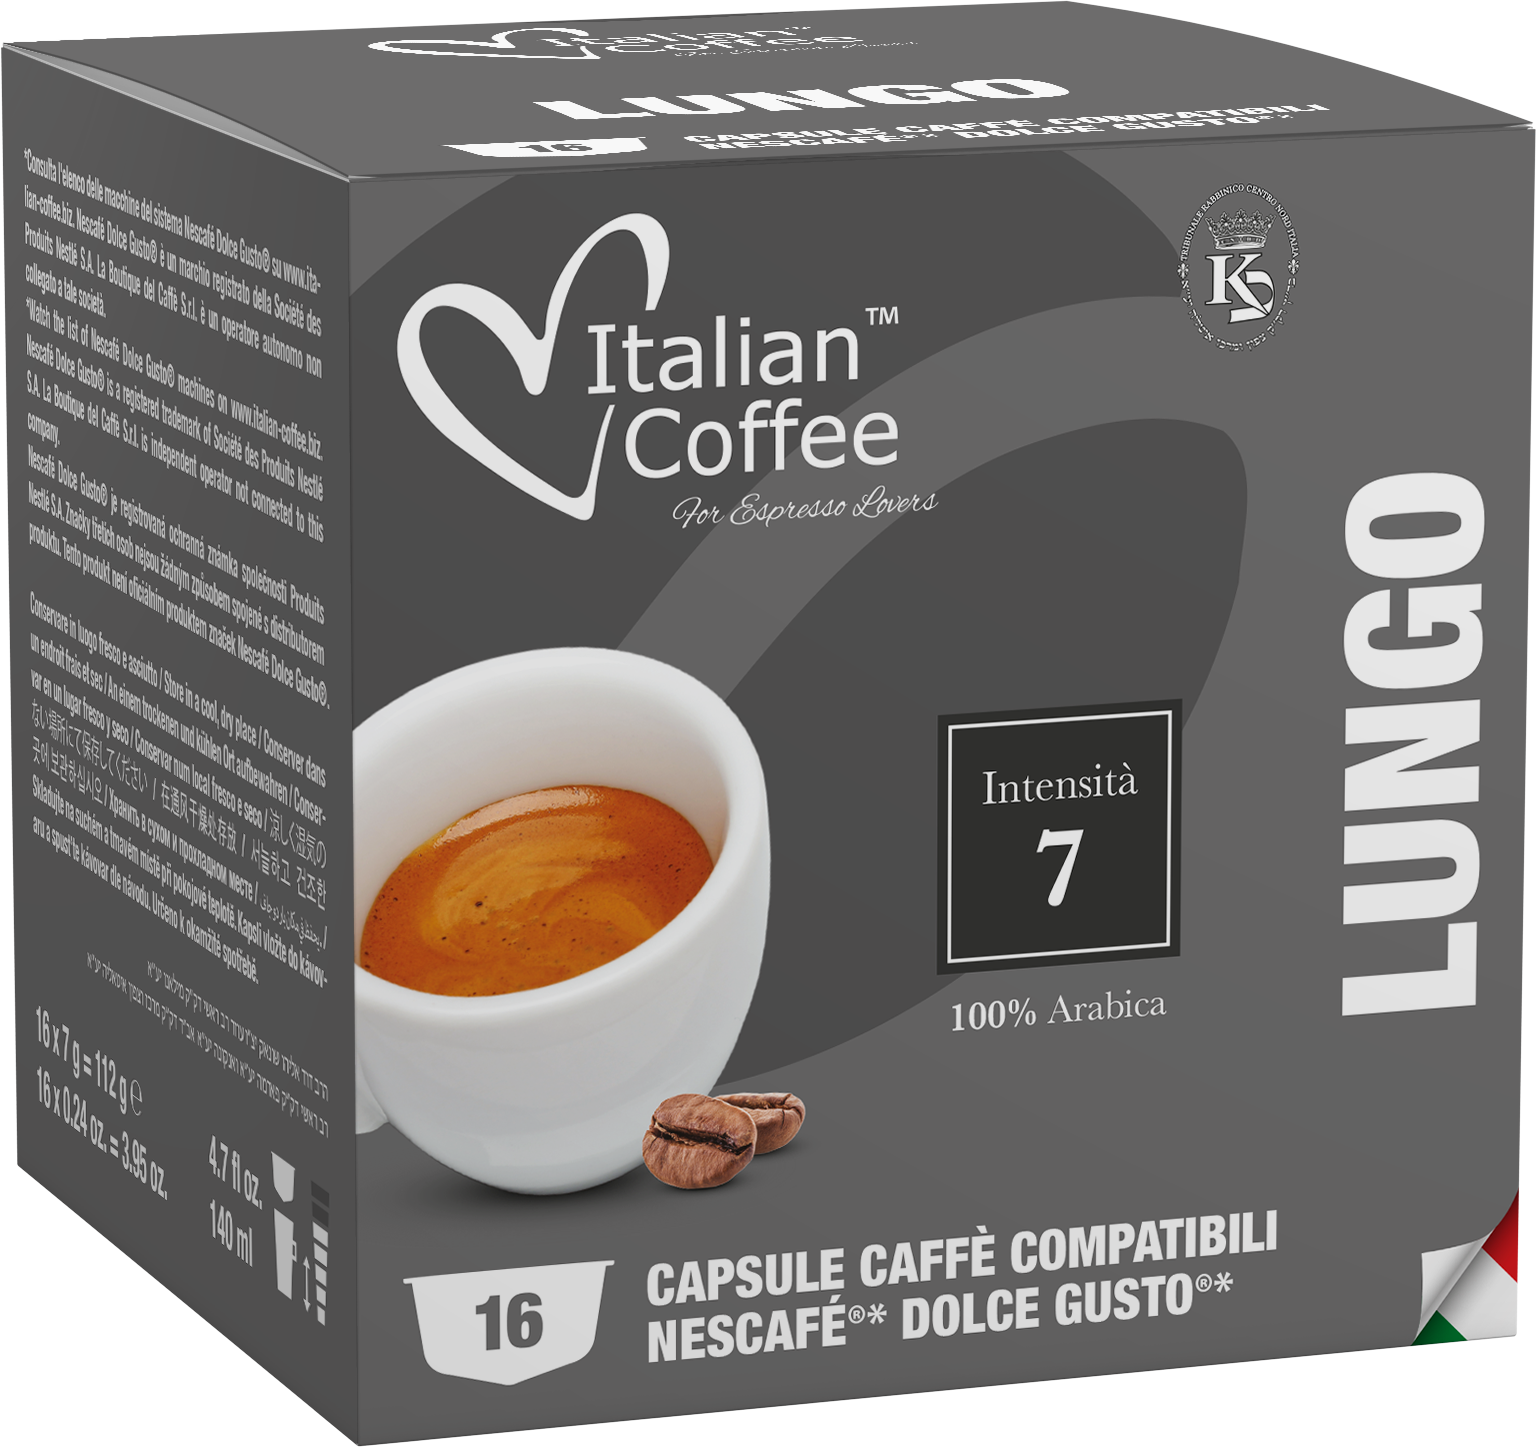 Nescafe Dolce Gusto, Caffe Lungo, 16 Count